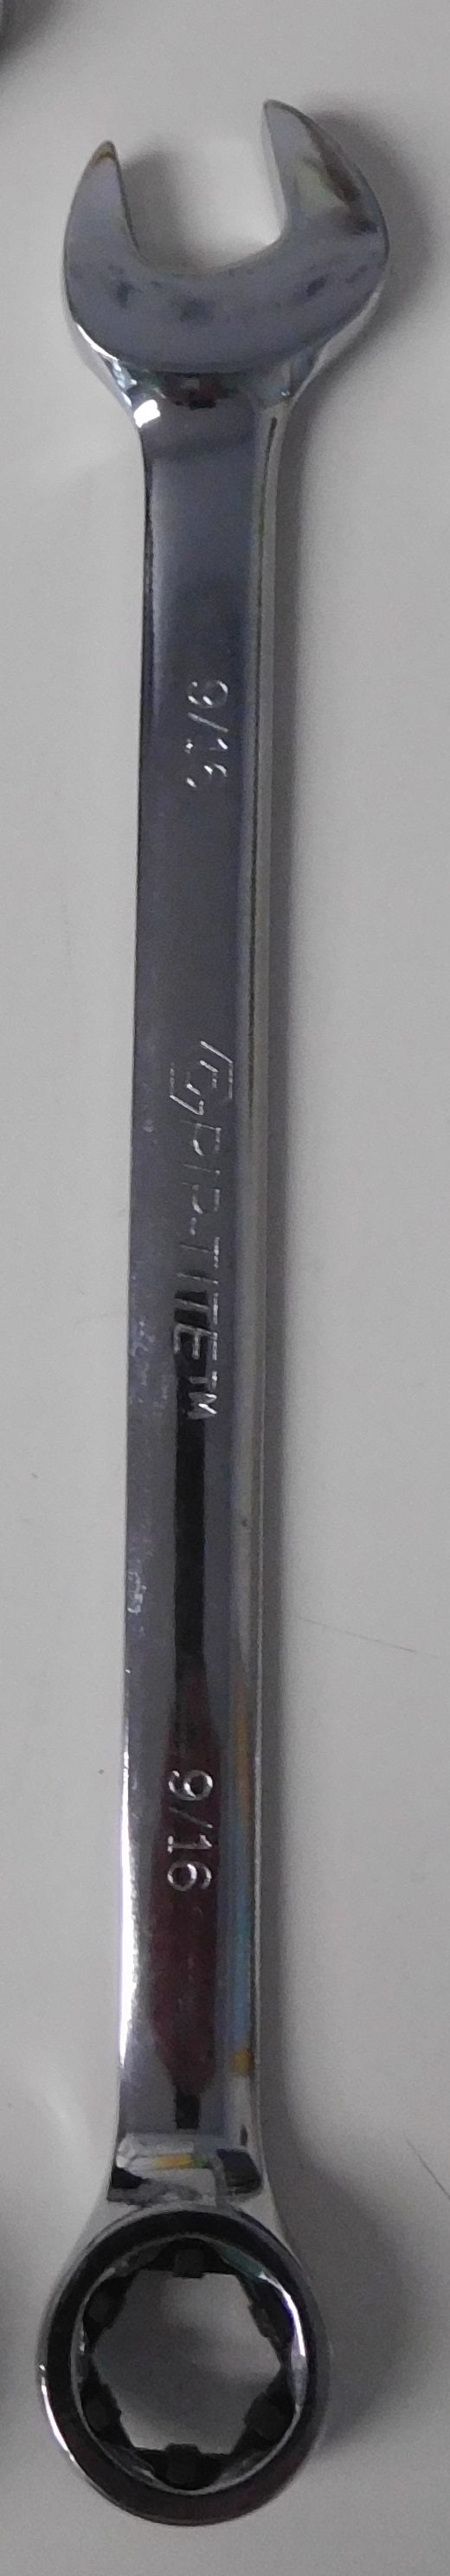 Grip-Tite 9/16" GT-Pro Series SAE Wrench